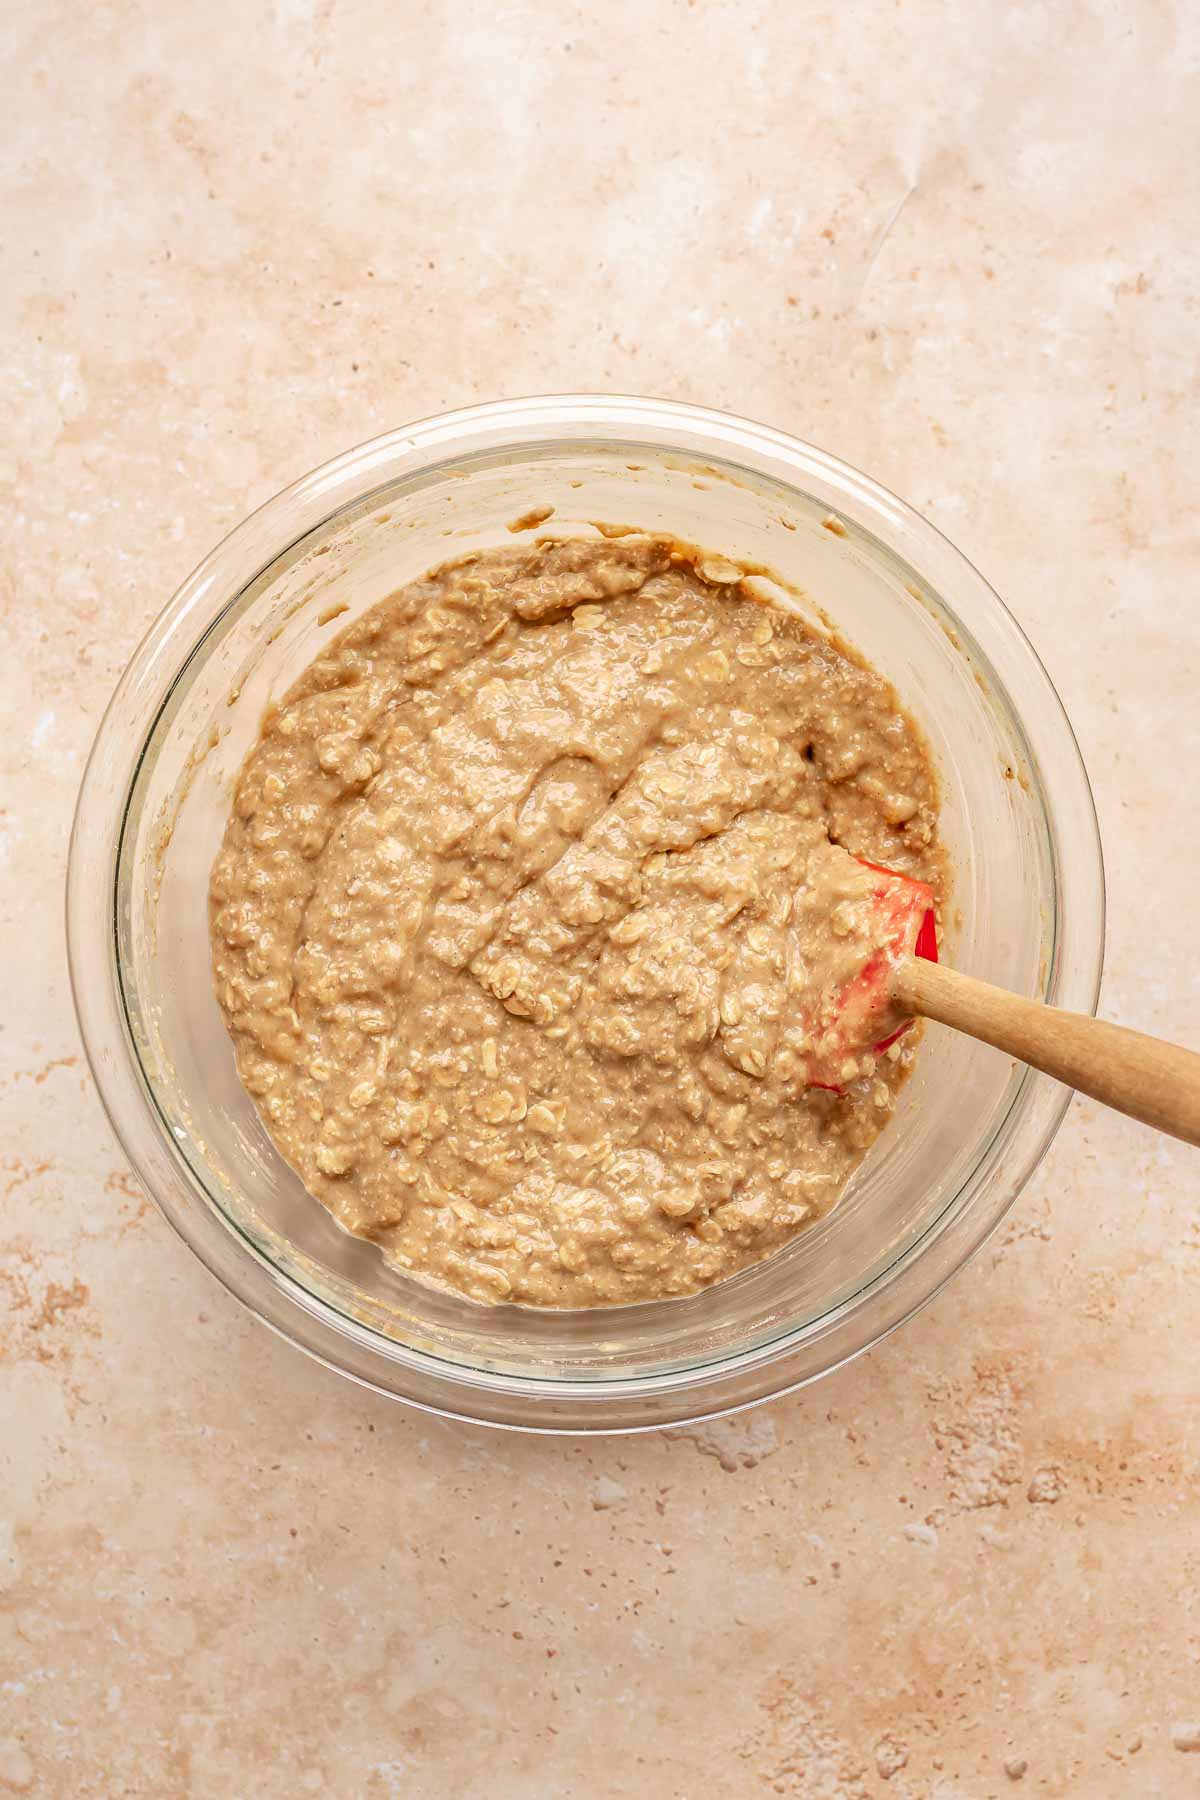 Oats added to the batter in a bowl.